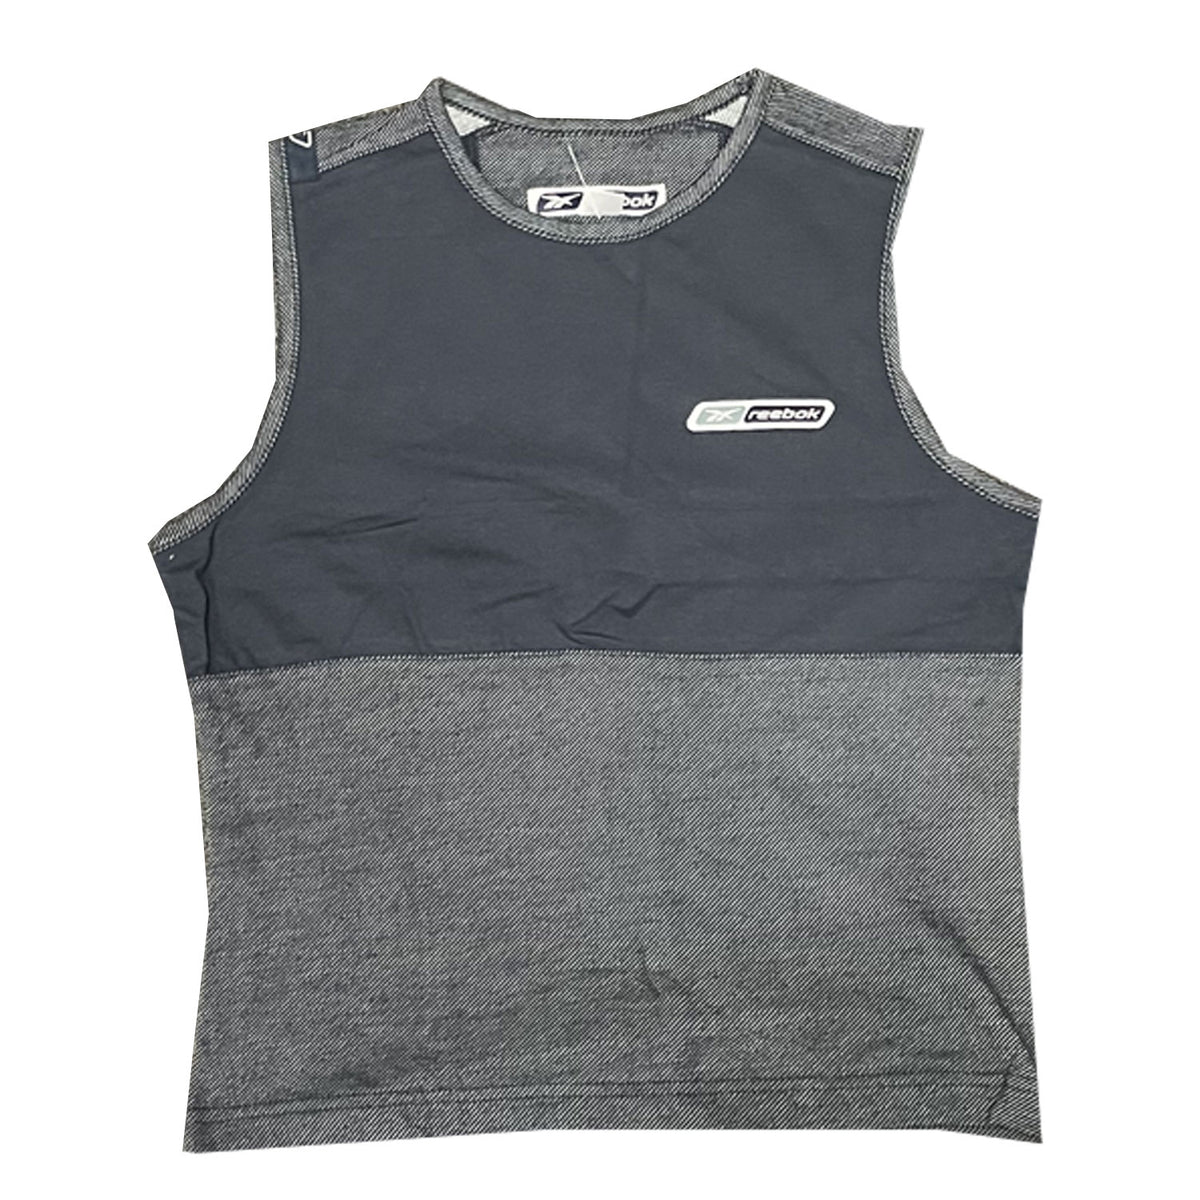 Reebok Womens Classic Sports Freestyle Vest Top 2 - RRP £14.99